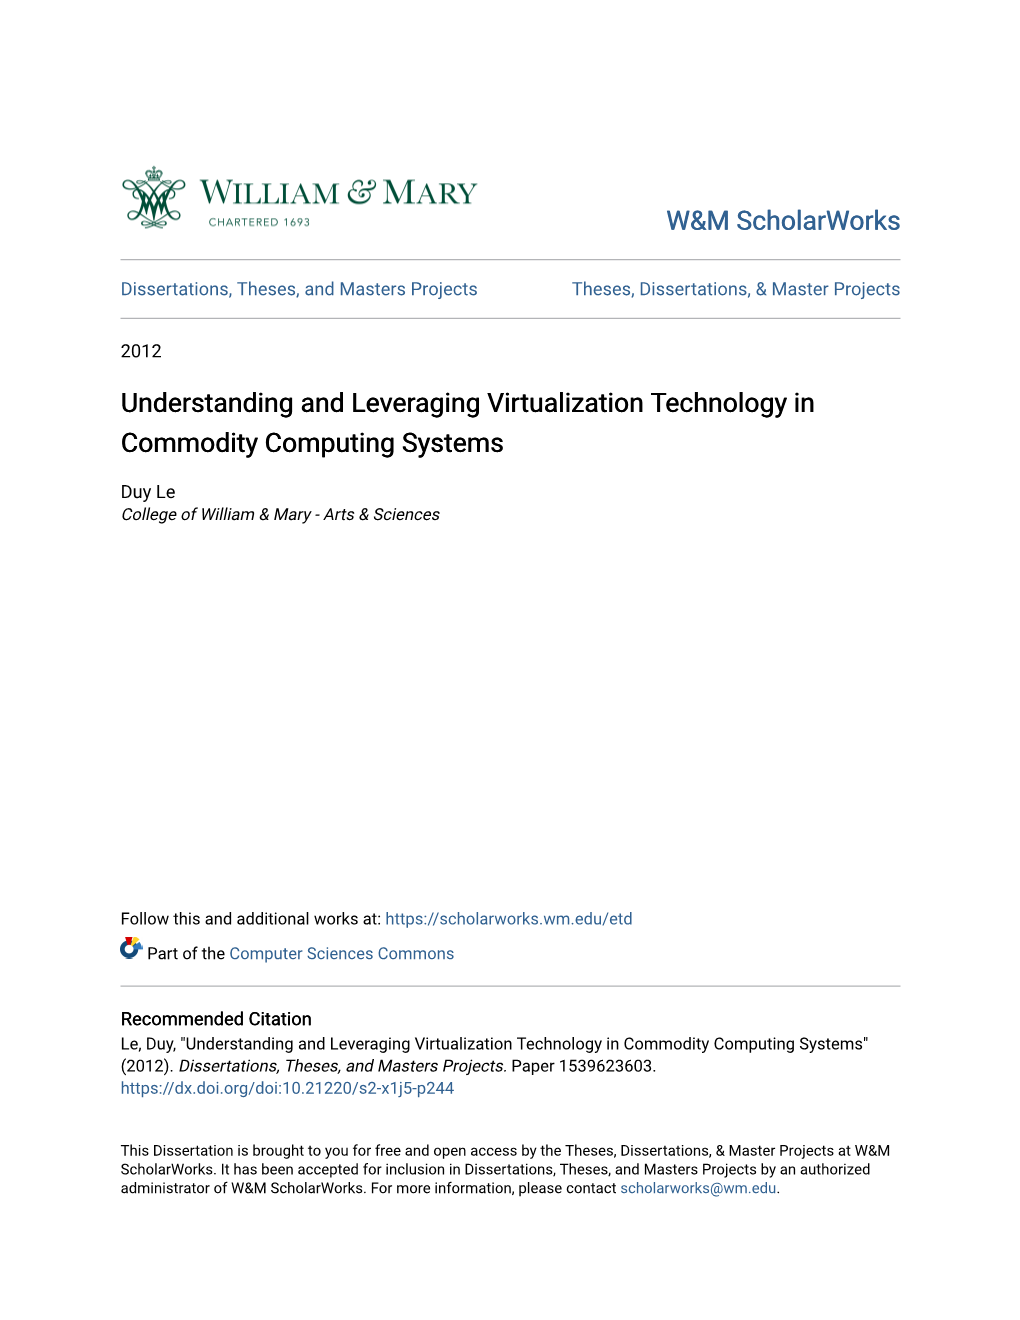 Understanding and Leveraging Virtualization Technology in Commodity Computing Systems